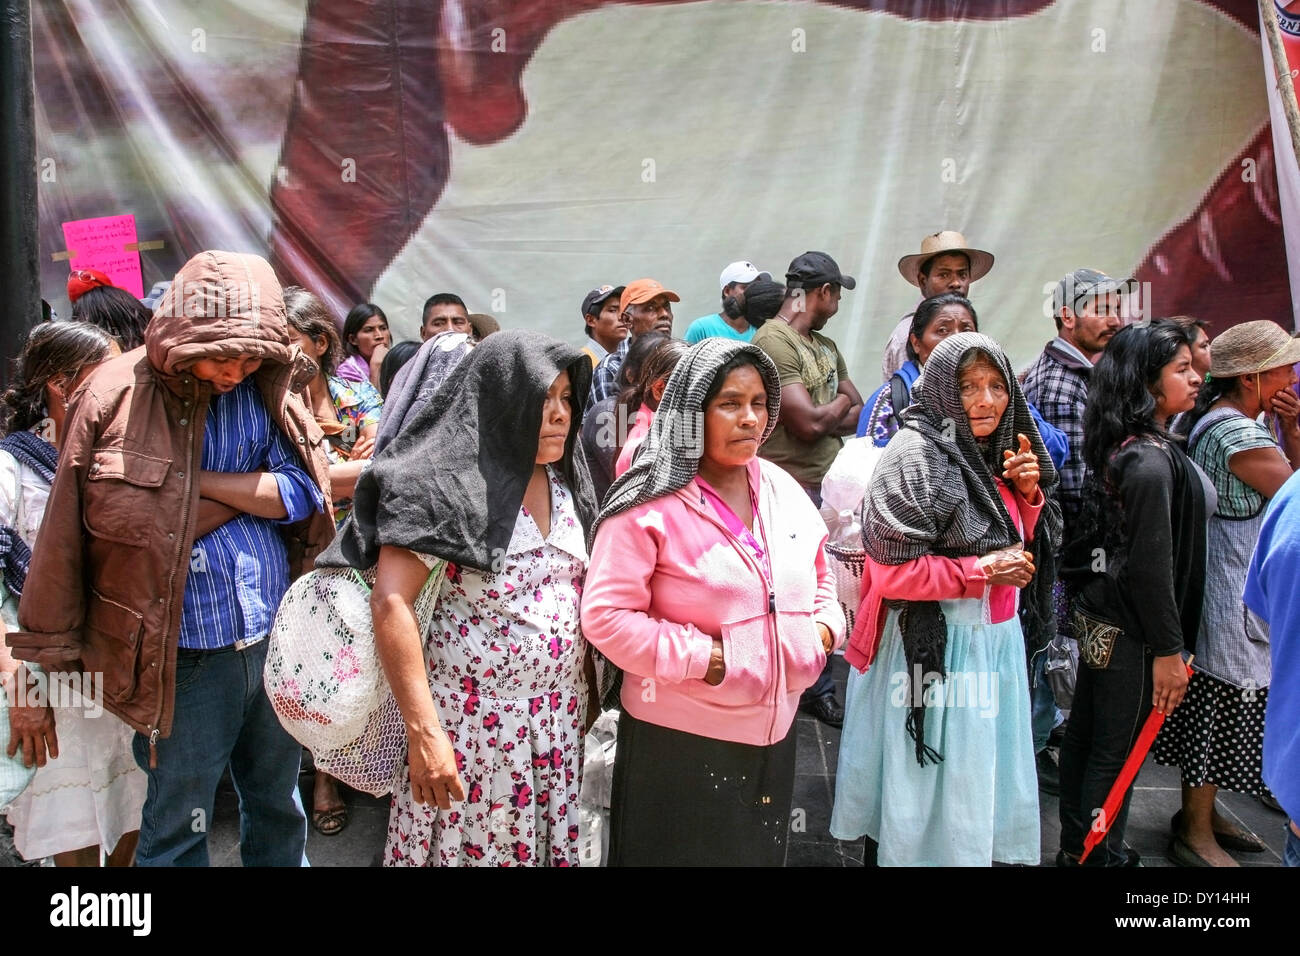 Oaxaca Zocalo, Mexico,Tuesday April 1, 2014: some of the faces of Oaxaca's rural poor at Antorchista anti poverty demonstration in Oaxaca Zocalo Credit:  Dorothy Alexander/Alamy Live News Stock Photo